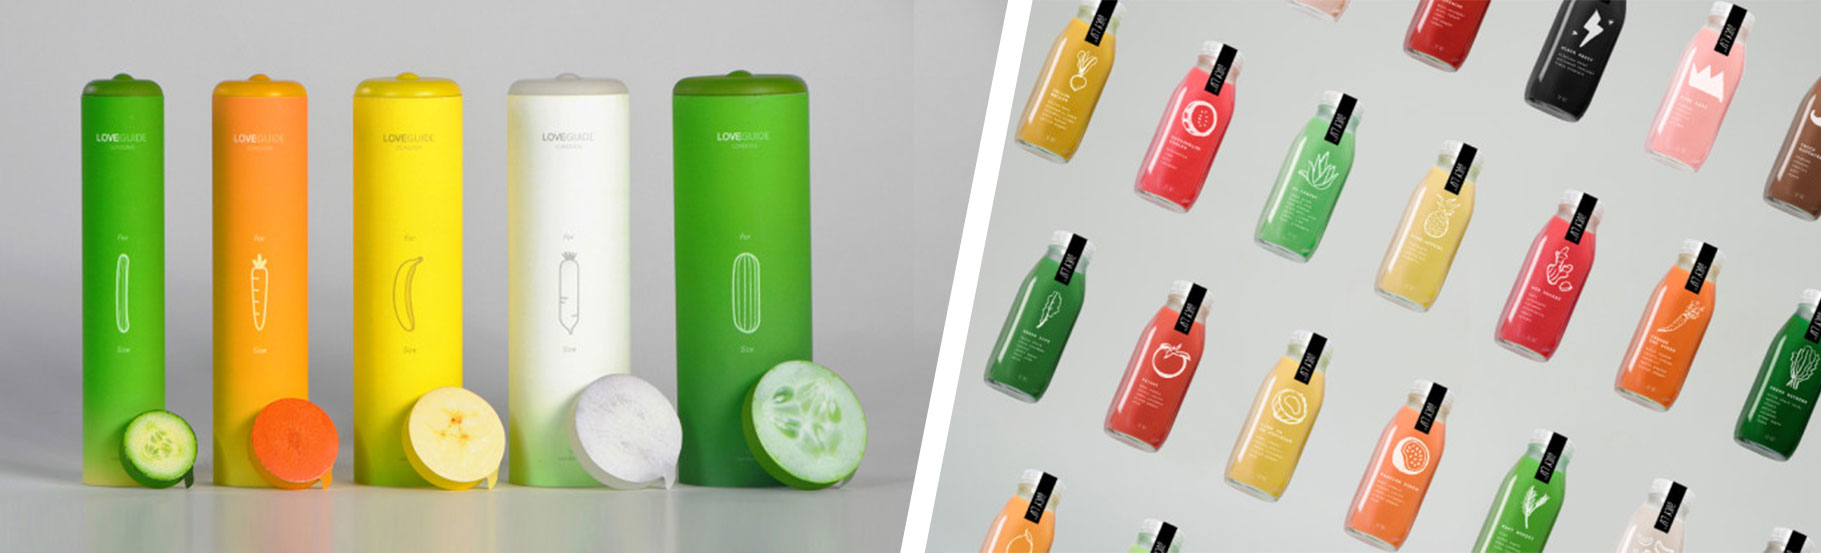 Trends in packaging design in 2020. that attracted our attention